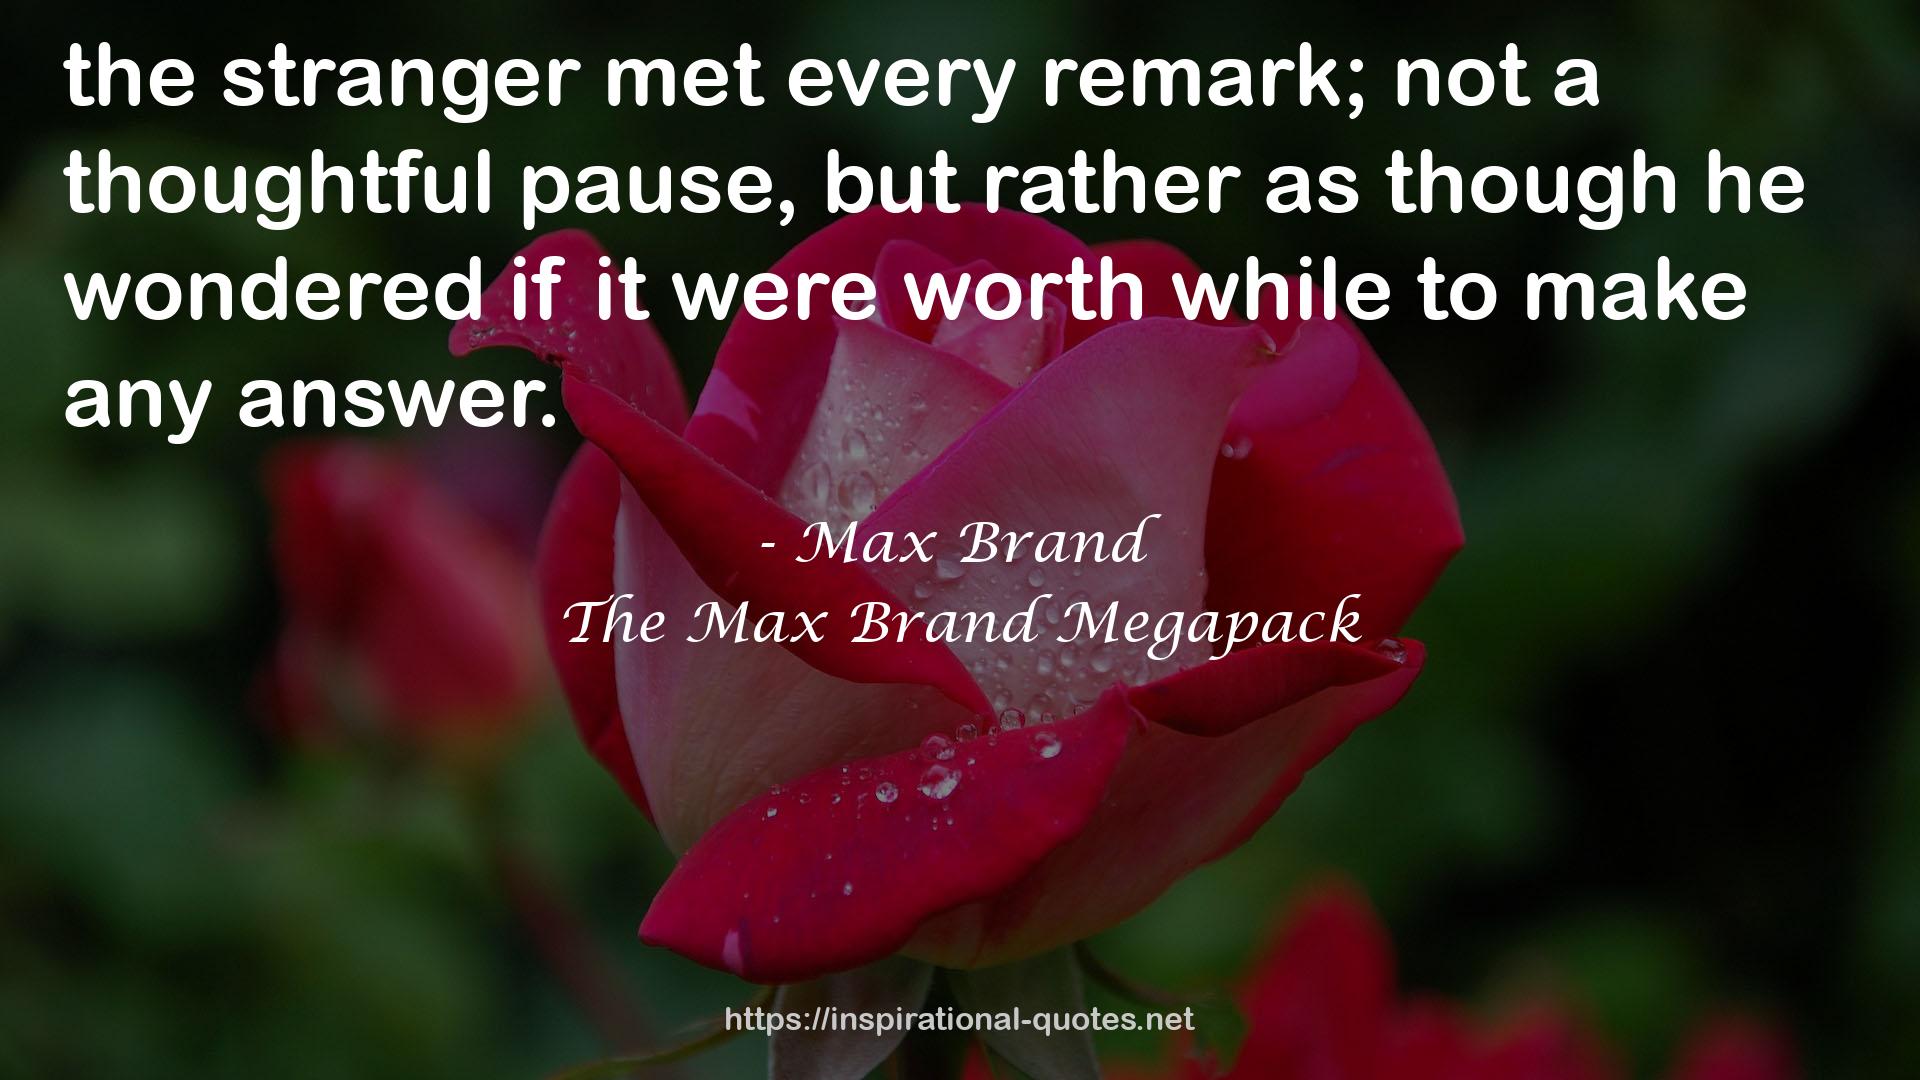 The Max Brand Megapack QUOTES